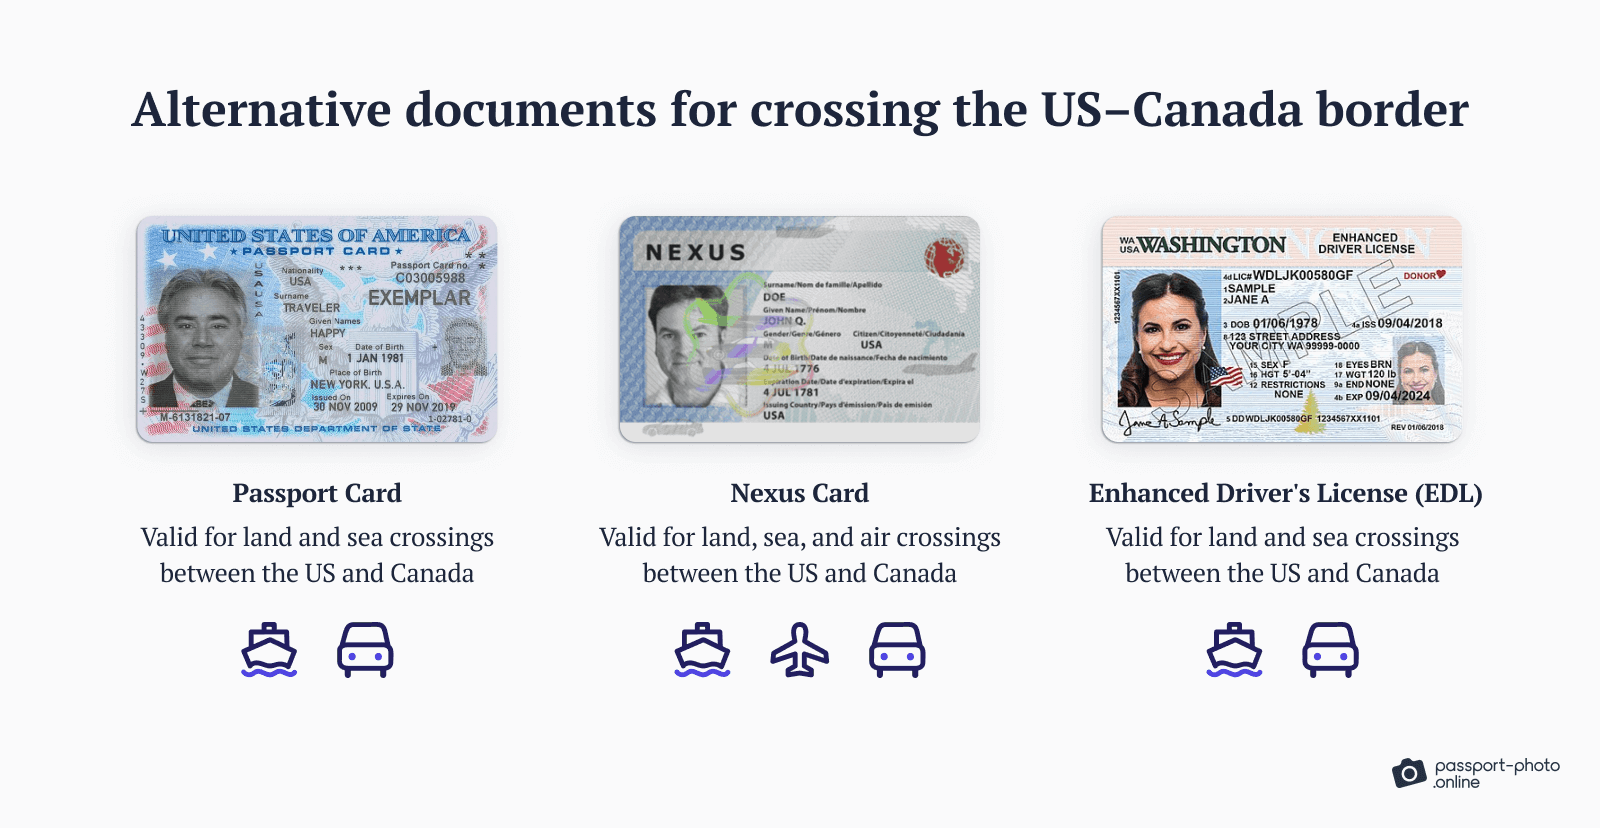 A graphic showing alternative documents used for crossing the US-Canadian border, including a passport card, NEXUS card, and an enhanced driver’s license. 